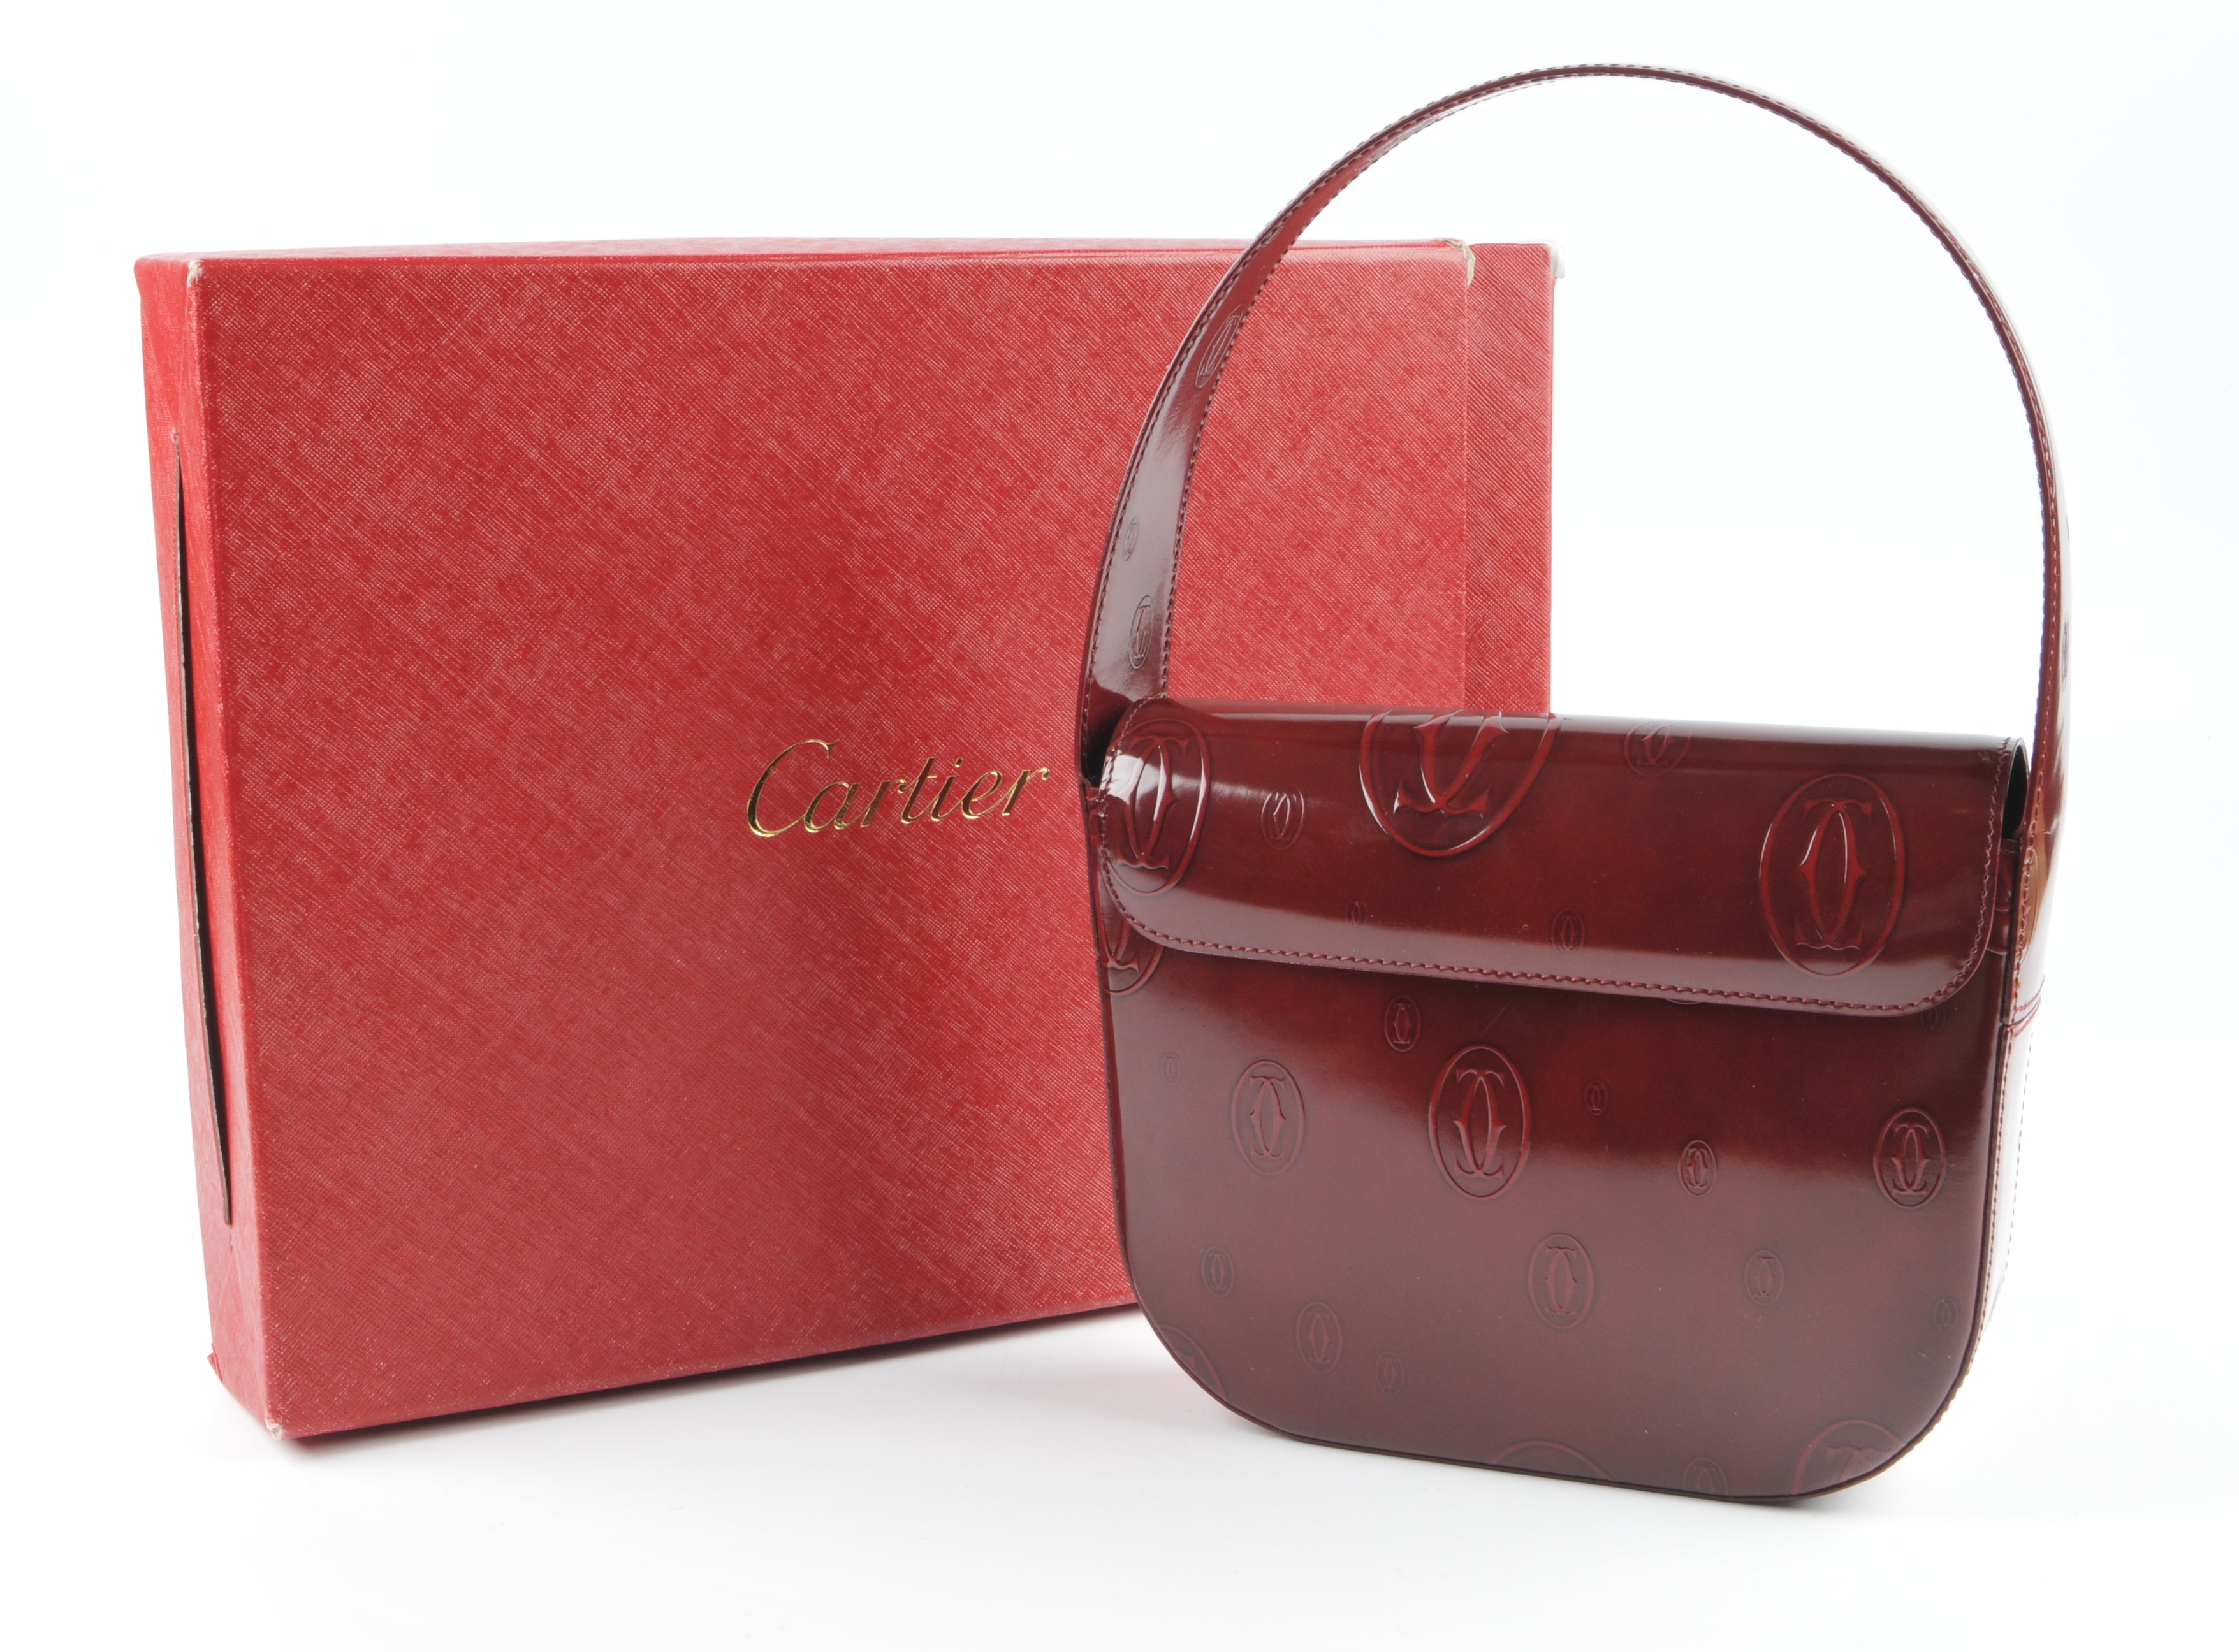 CARTIER - a Happy Birthday Bordeaux handbag. Designed with a structured shape, burgundy monogram - Image 5 of 5